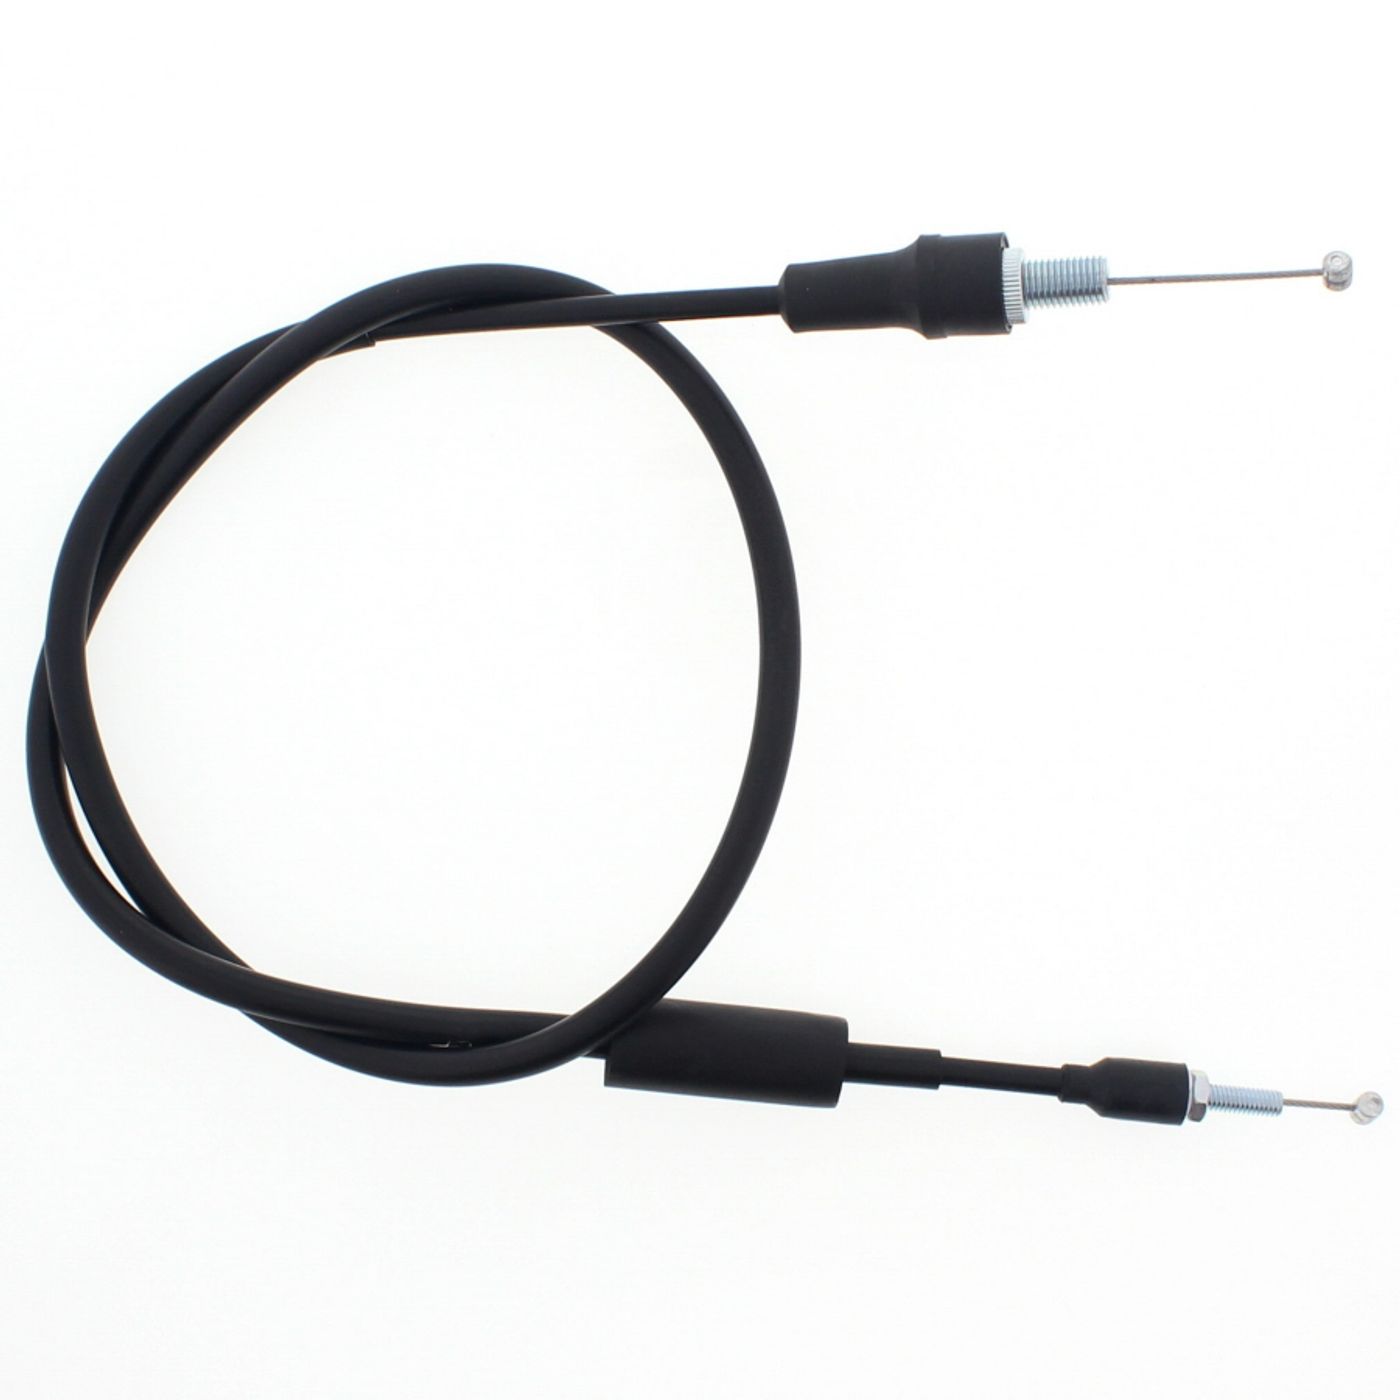 Wrp Throttle Cables - WRP451221 image